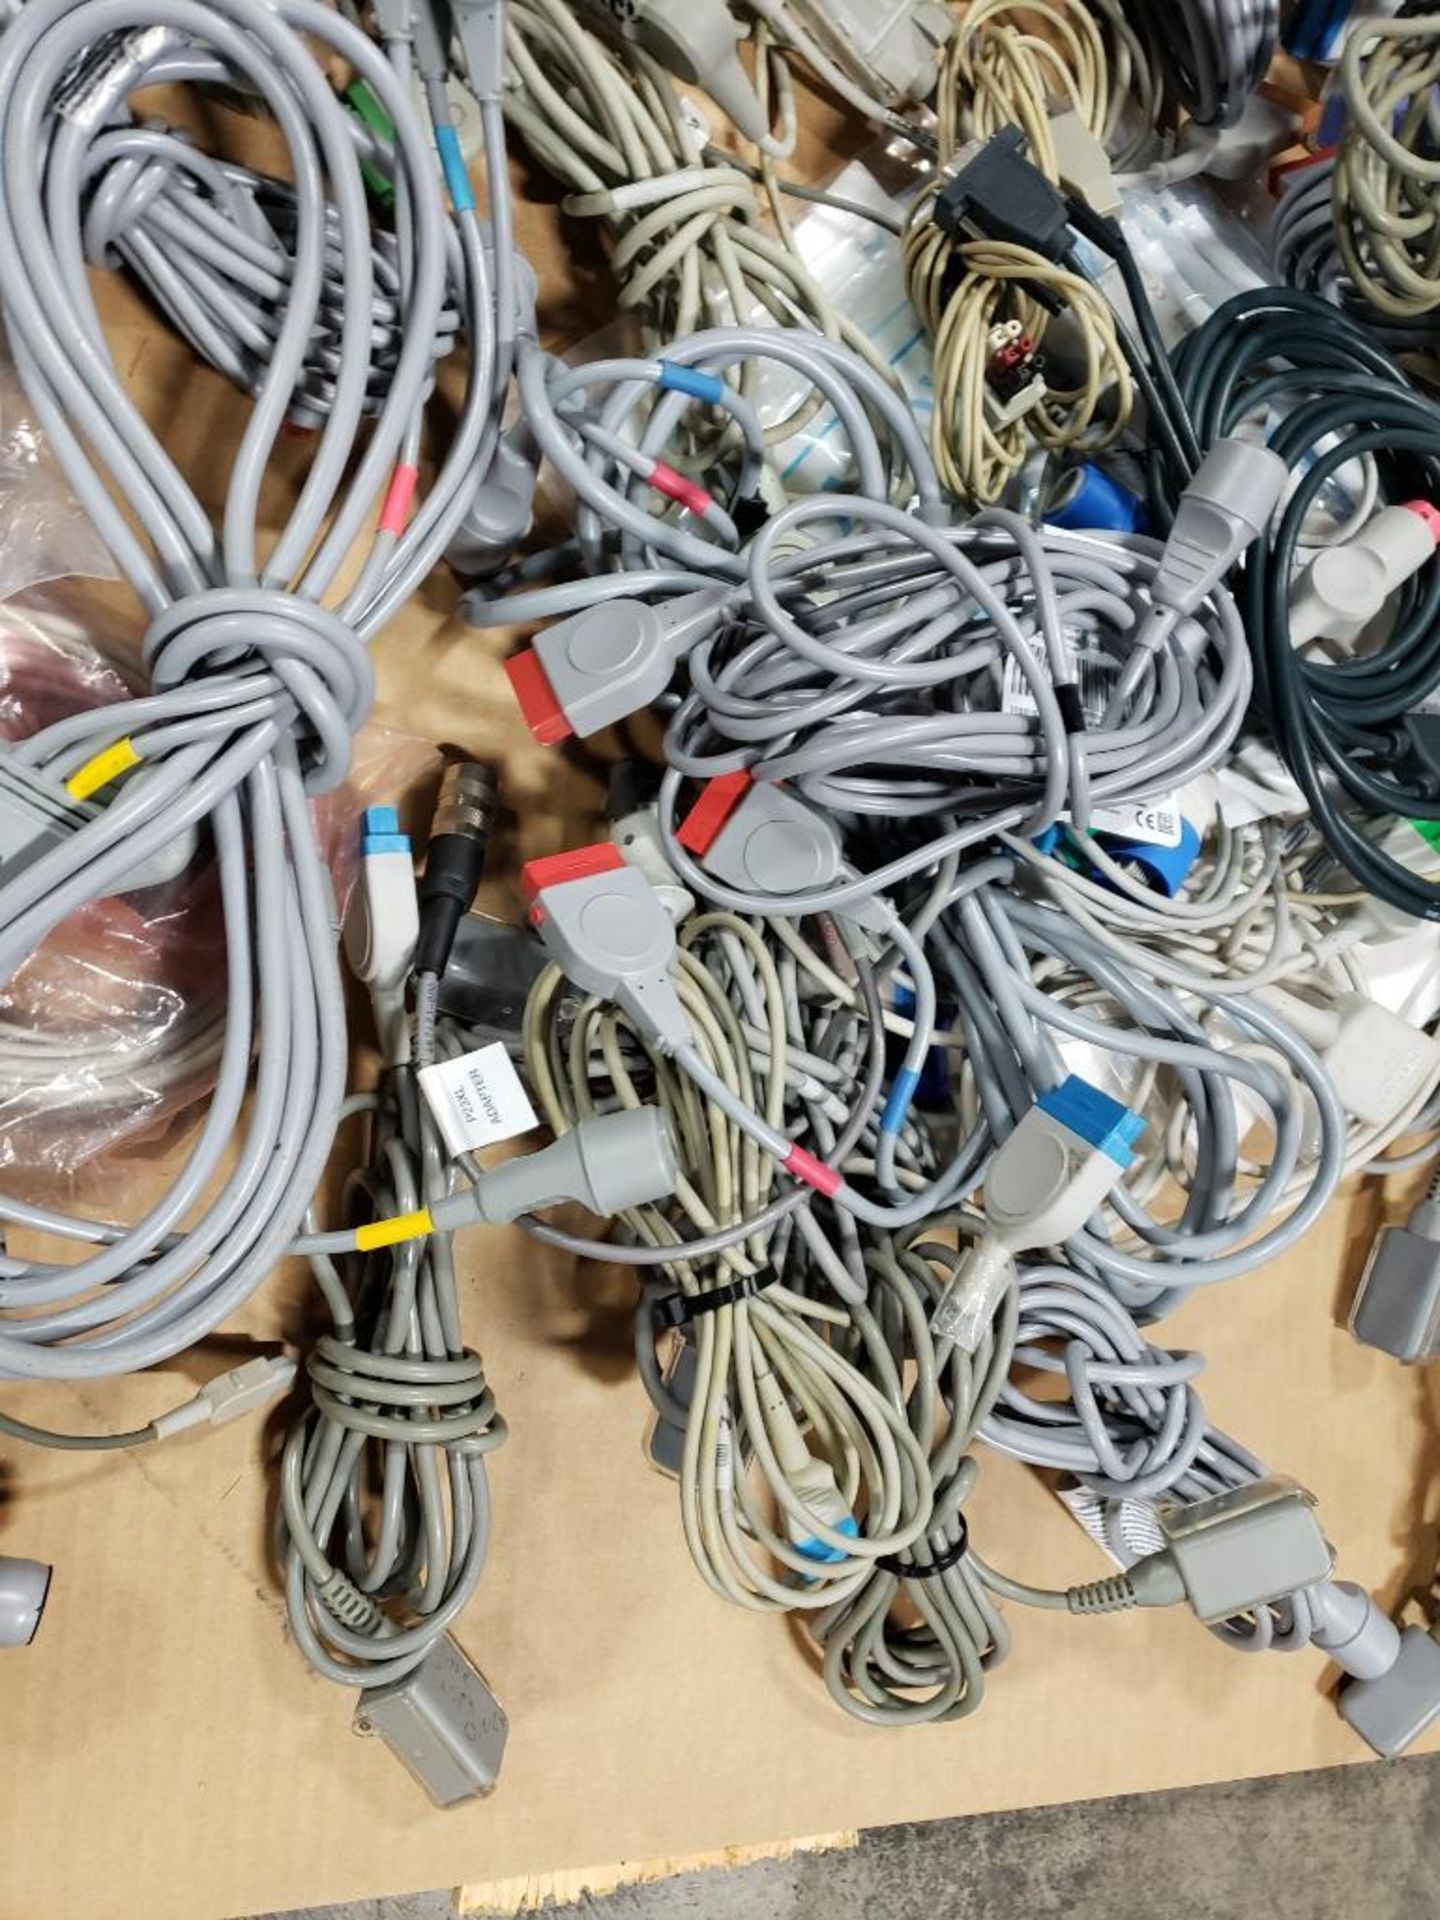 Large assortment of cords and cables. - Image 4 of 11